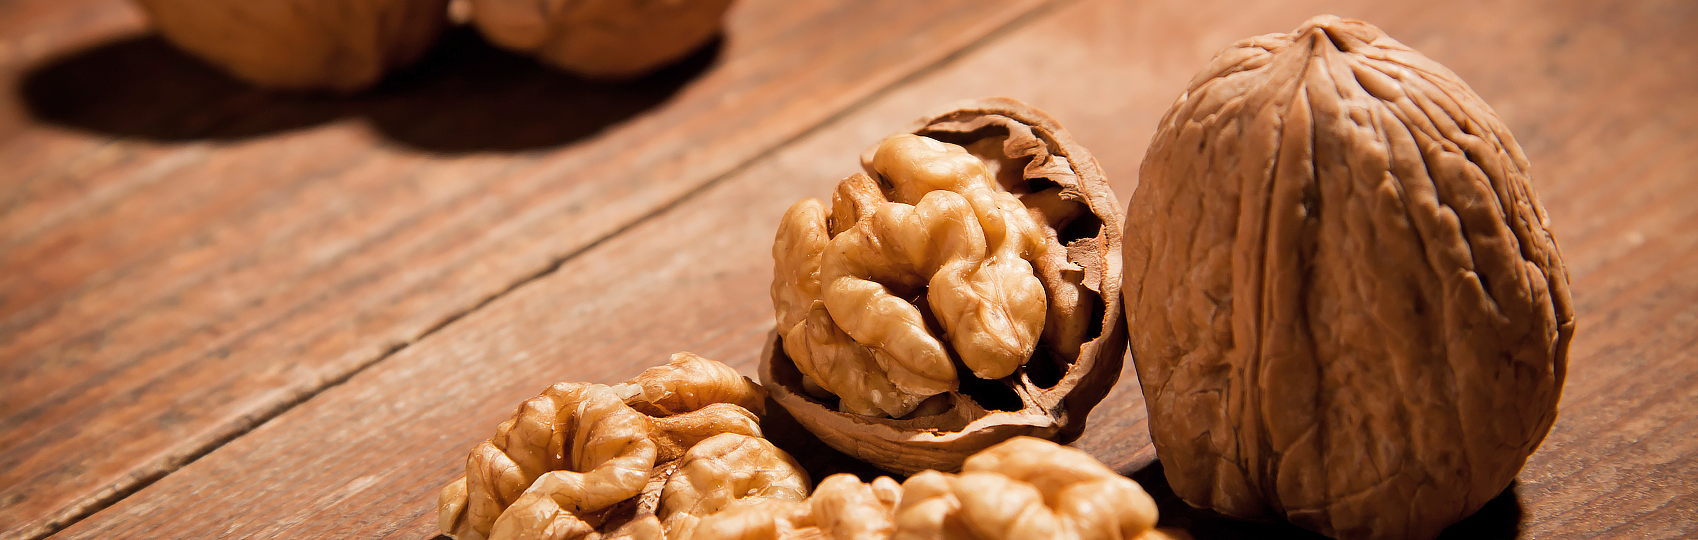 Why You Should Be Nuts About Nuts